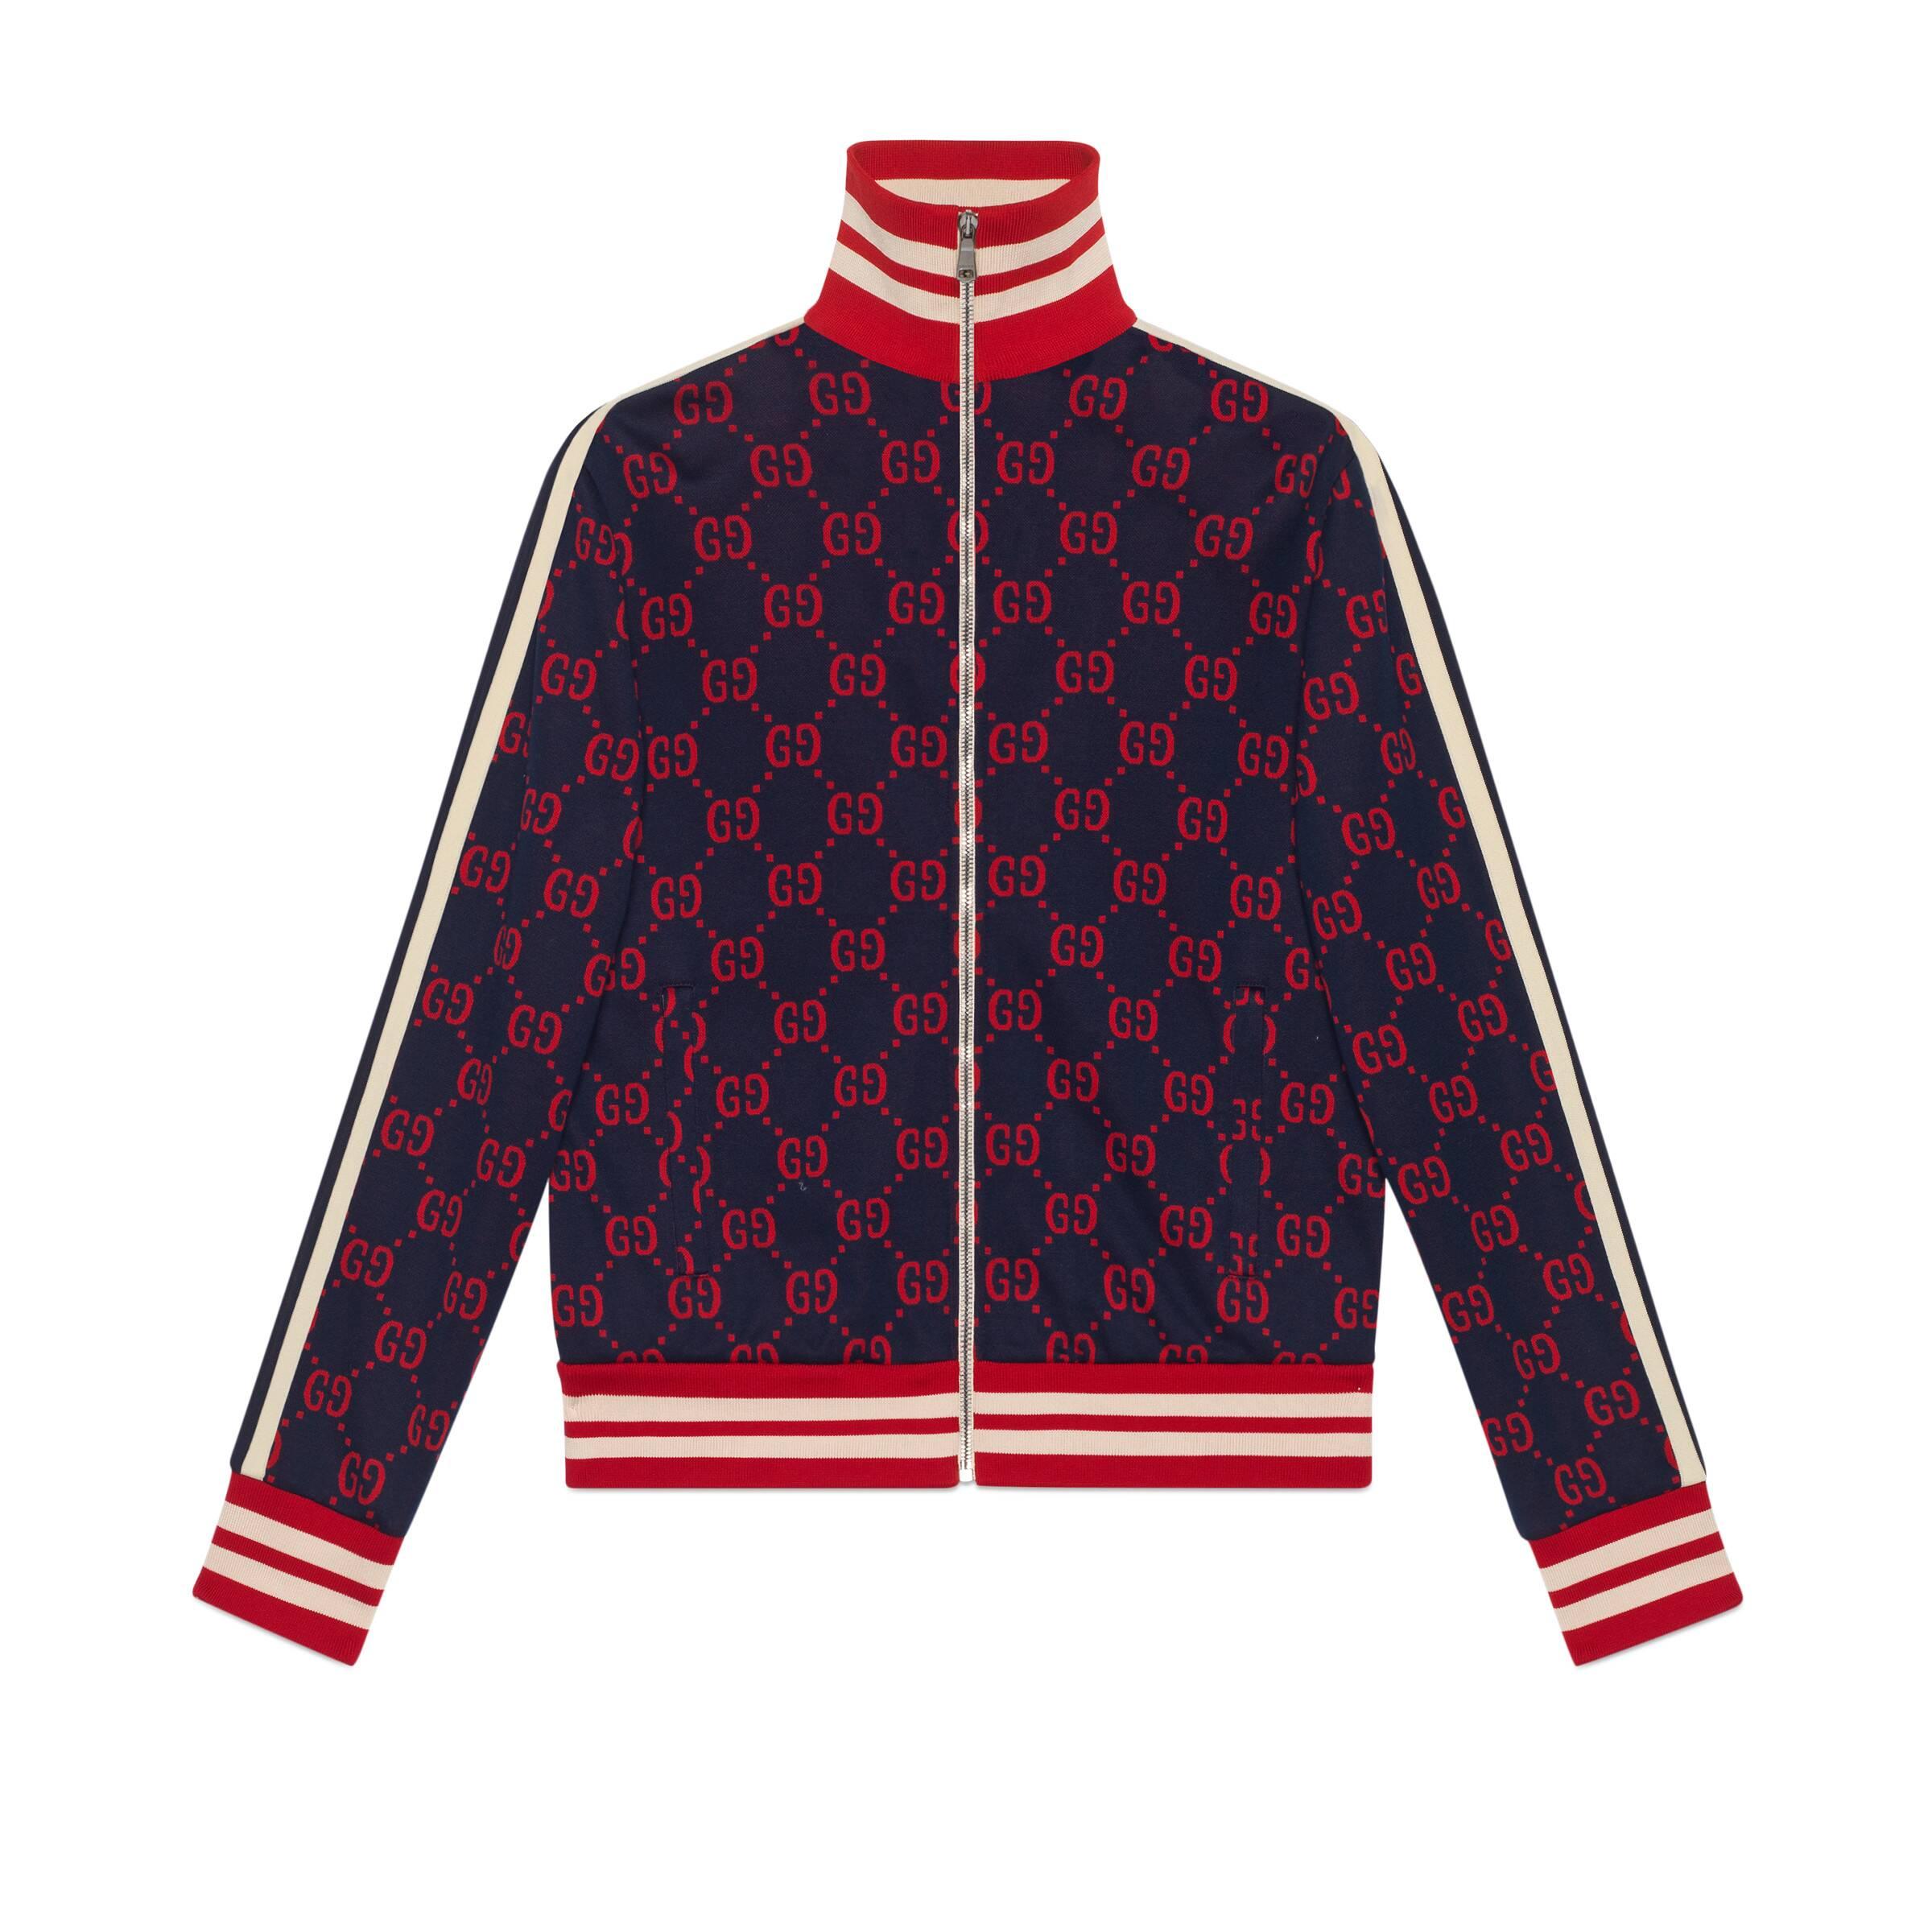 gucci jacket blue red white